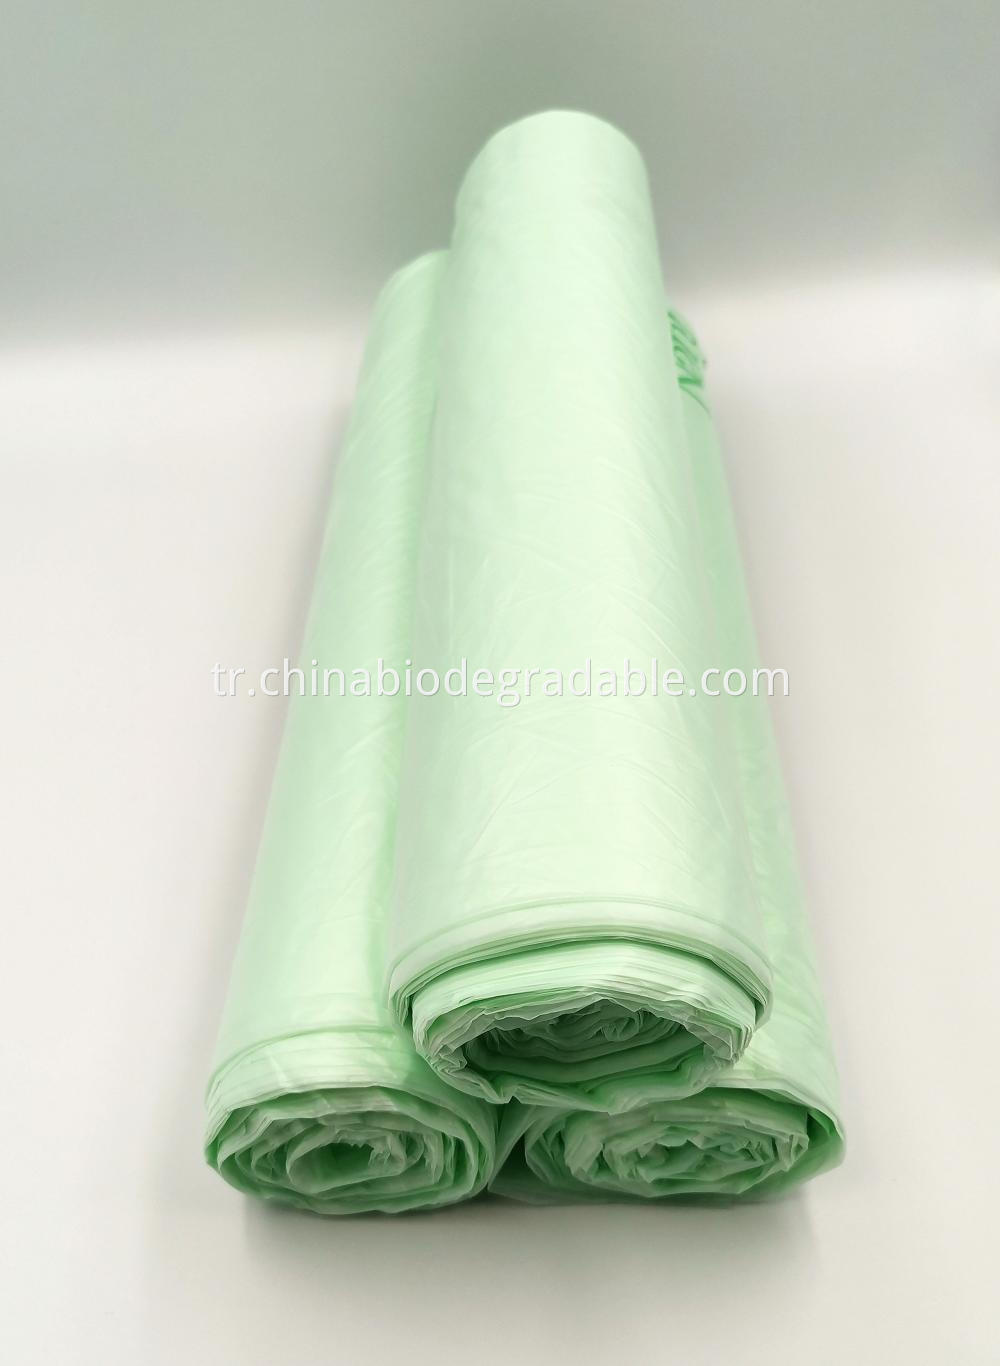 ASTM D6400 Certified Compostable Plastic Garbage Bags